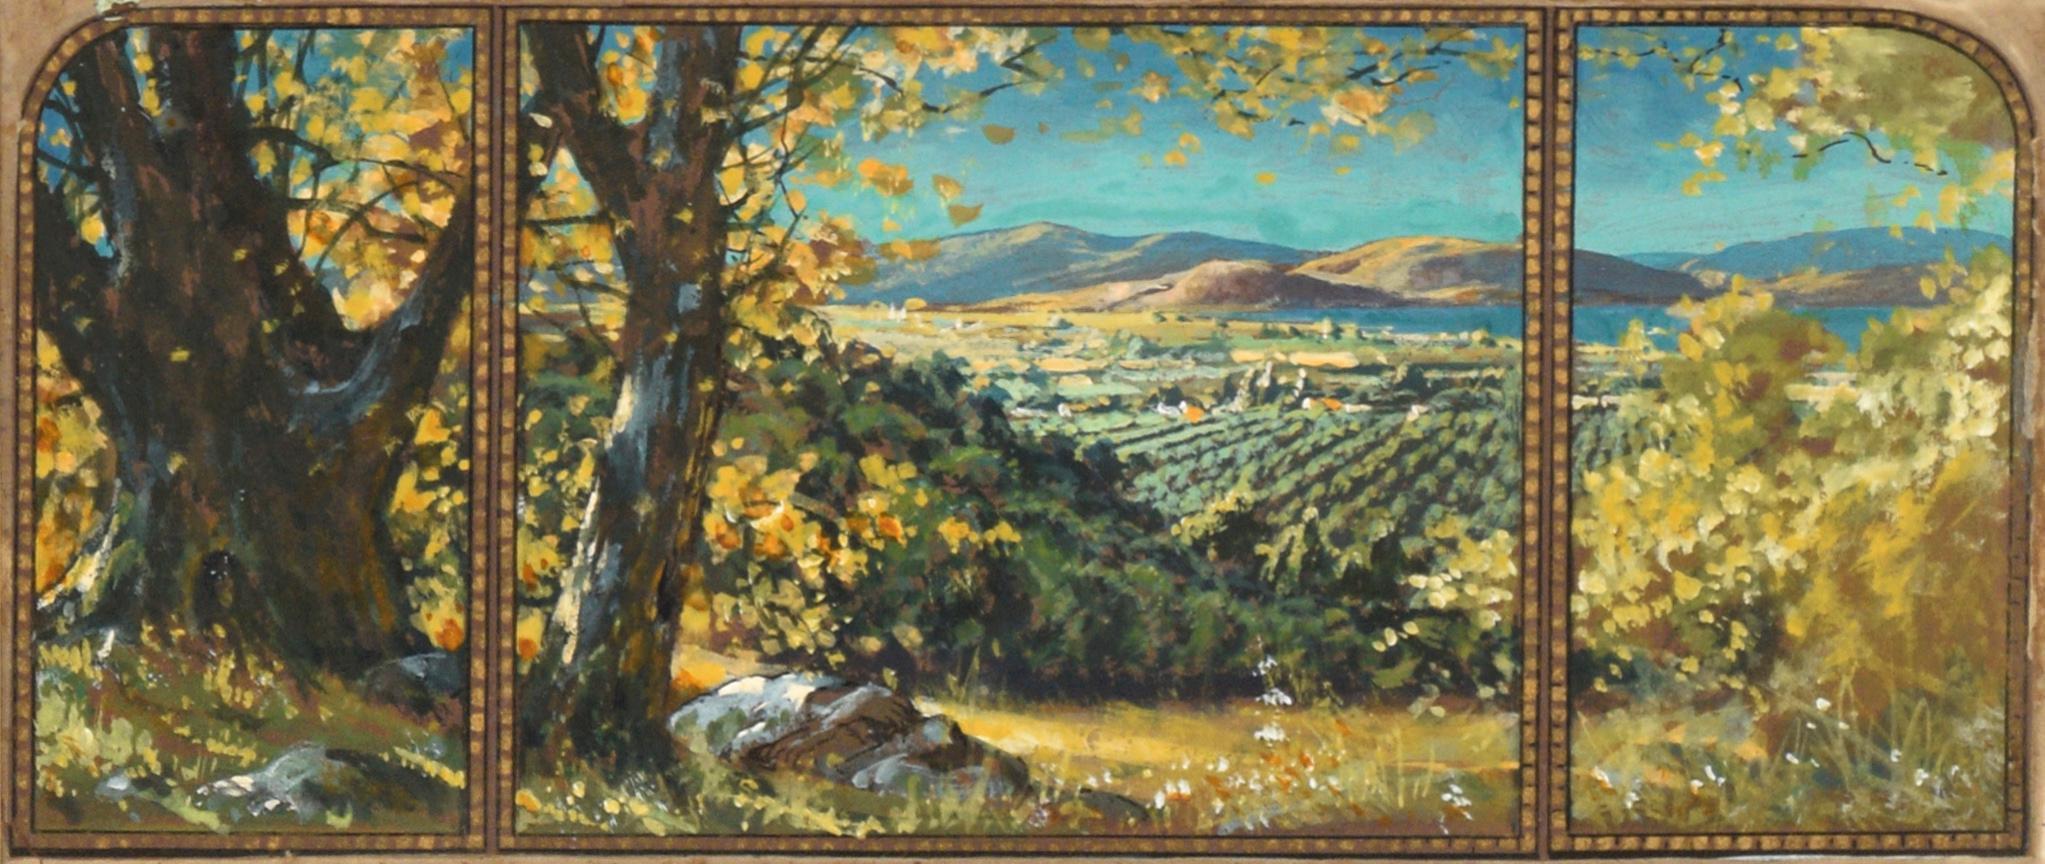 Looking Out Over the Vineyards, Early 20th Century Landscape Panorama  - Painting by California School